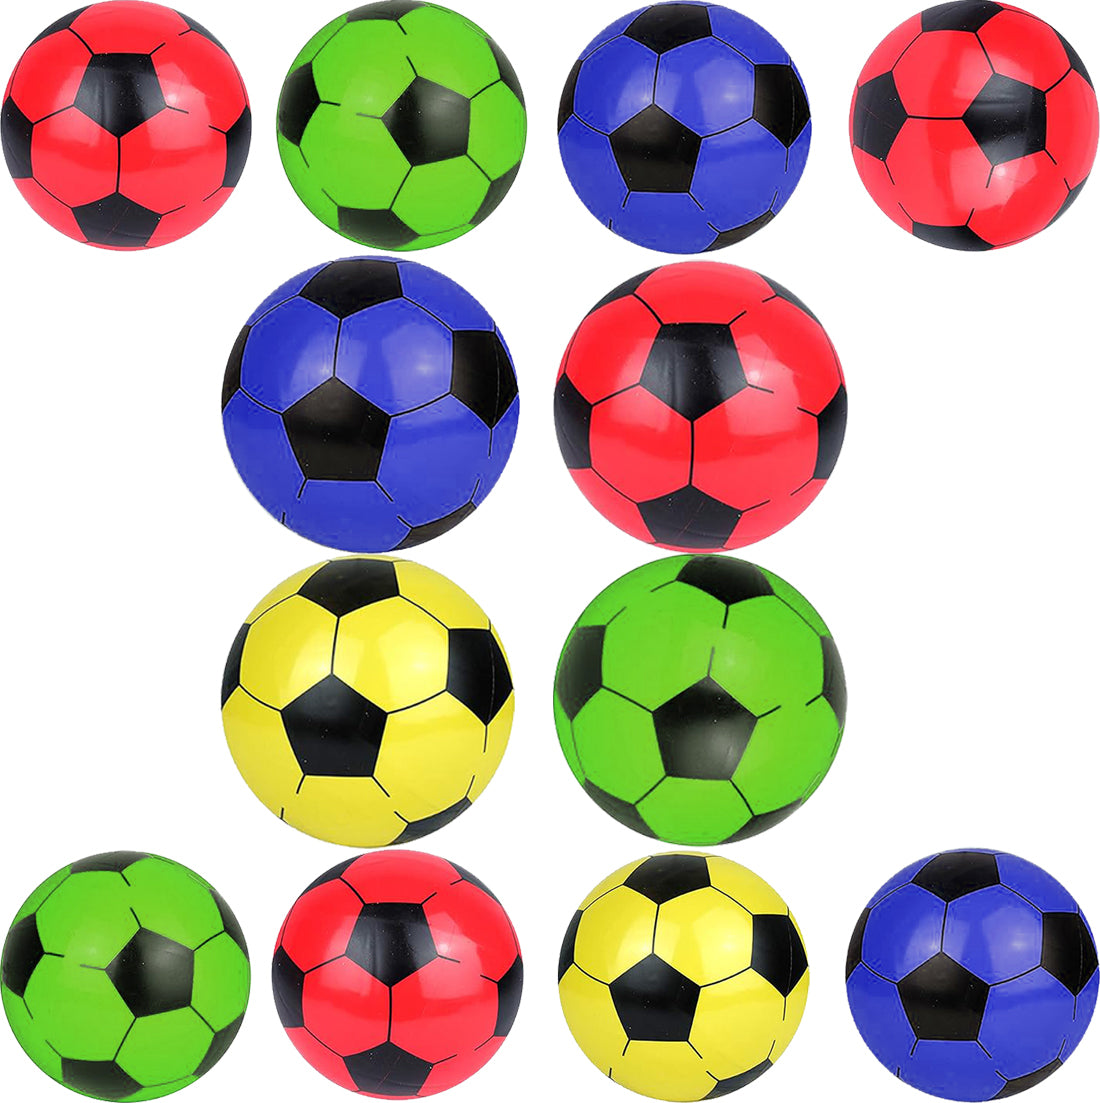 Fashionarie Club Inflatable Football (soccer) Lightweight for Kids Pool Toys Inflatable Beach Ball Soccer Soft Football Garden, Pool, Indoor, Outdoor, Home, Birthday, School & Parties Assorted Colors